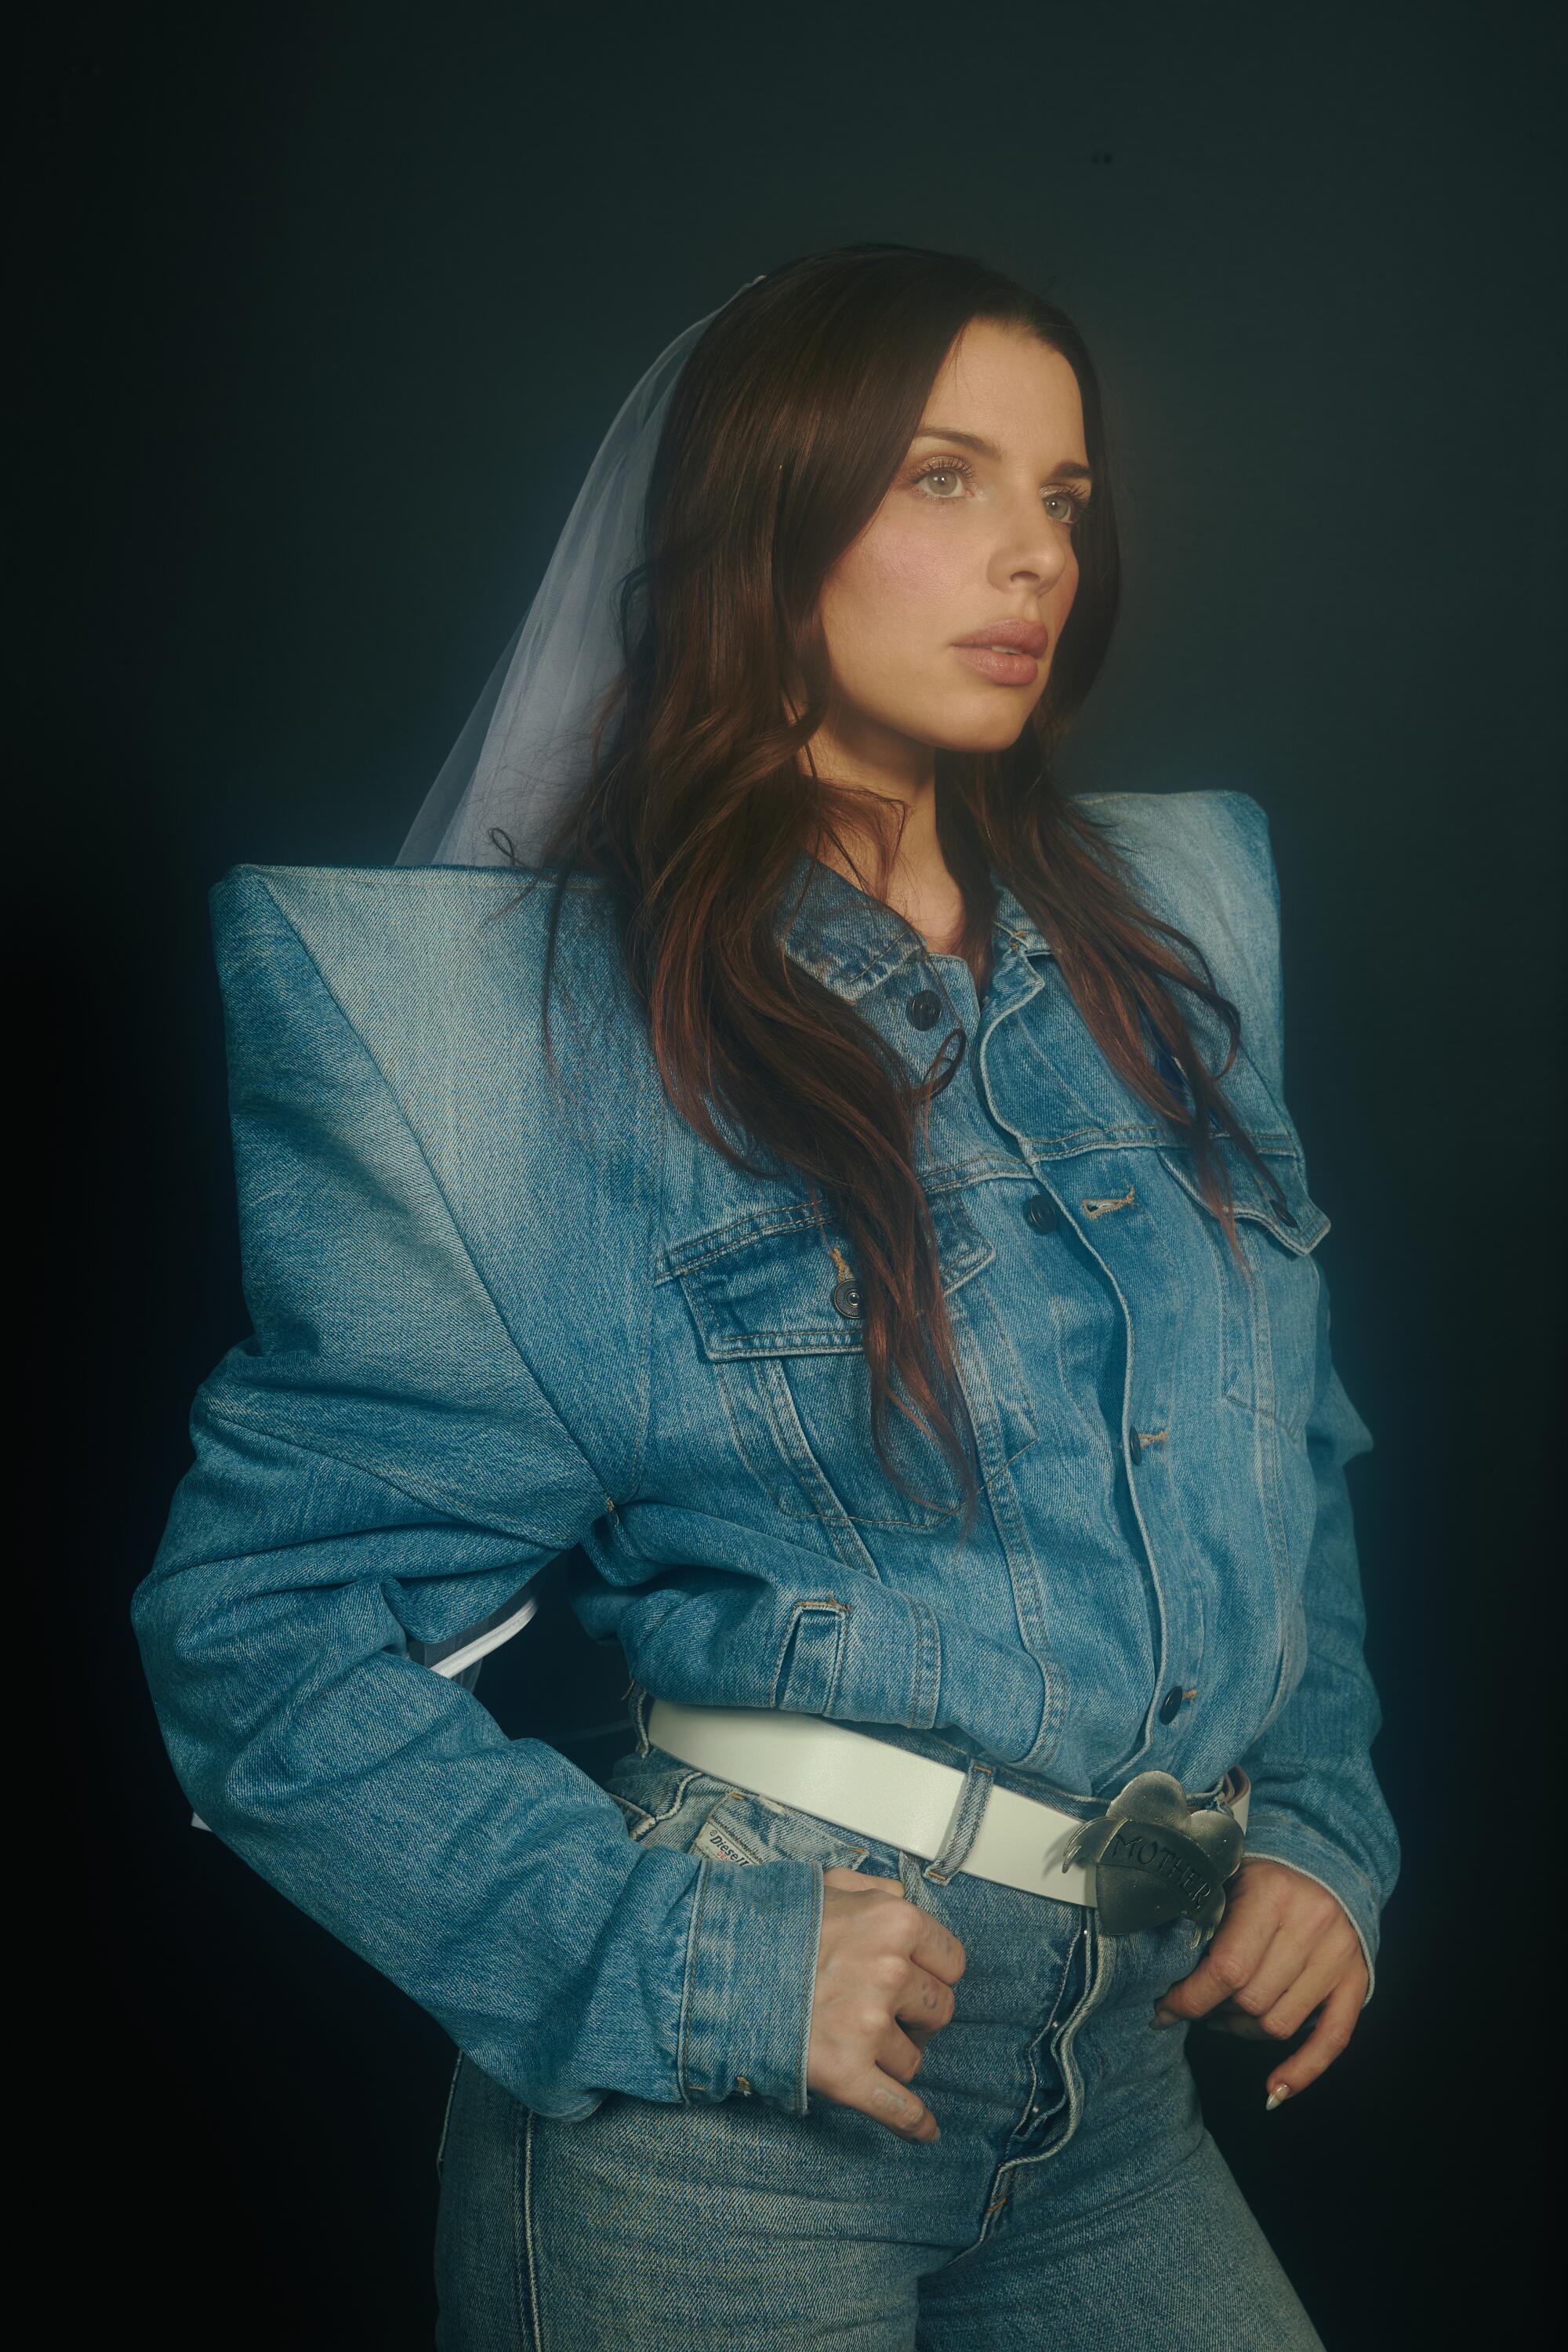 A woman in a denim jacket looks off camera.